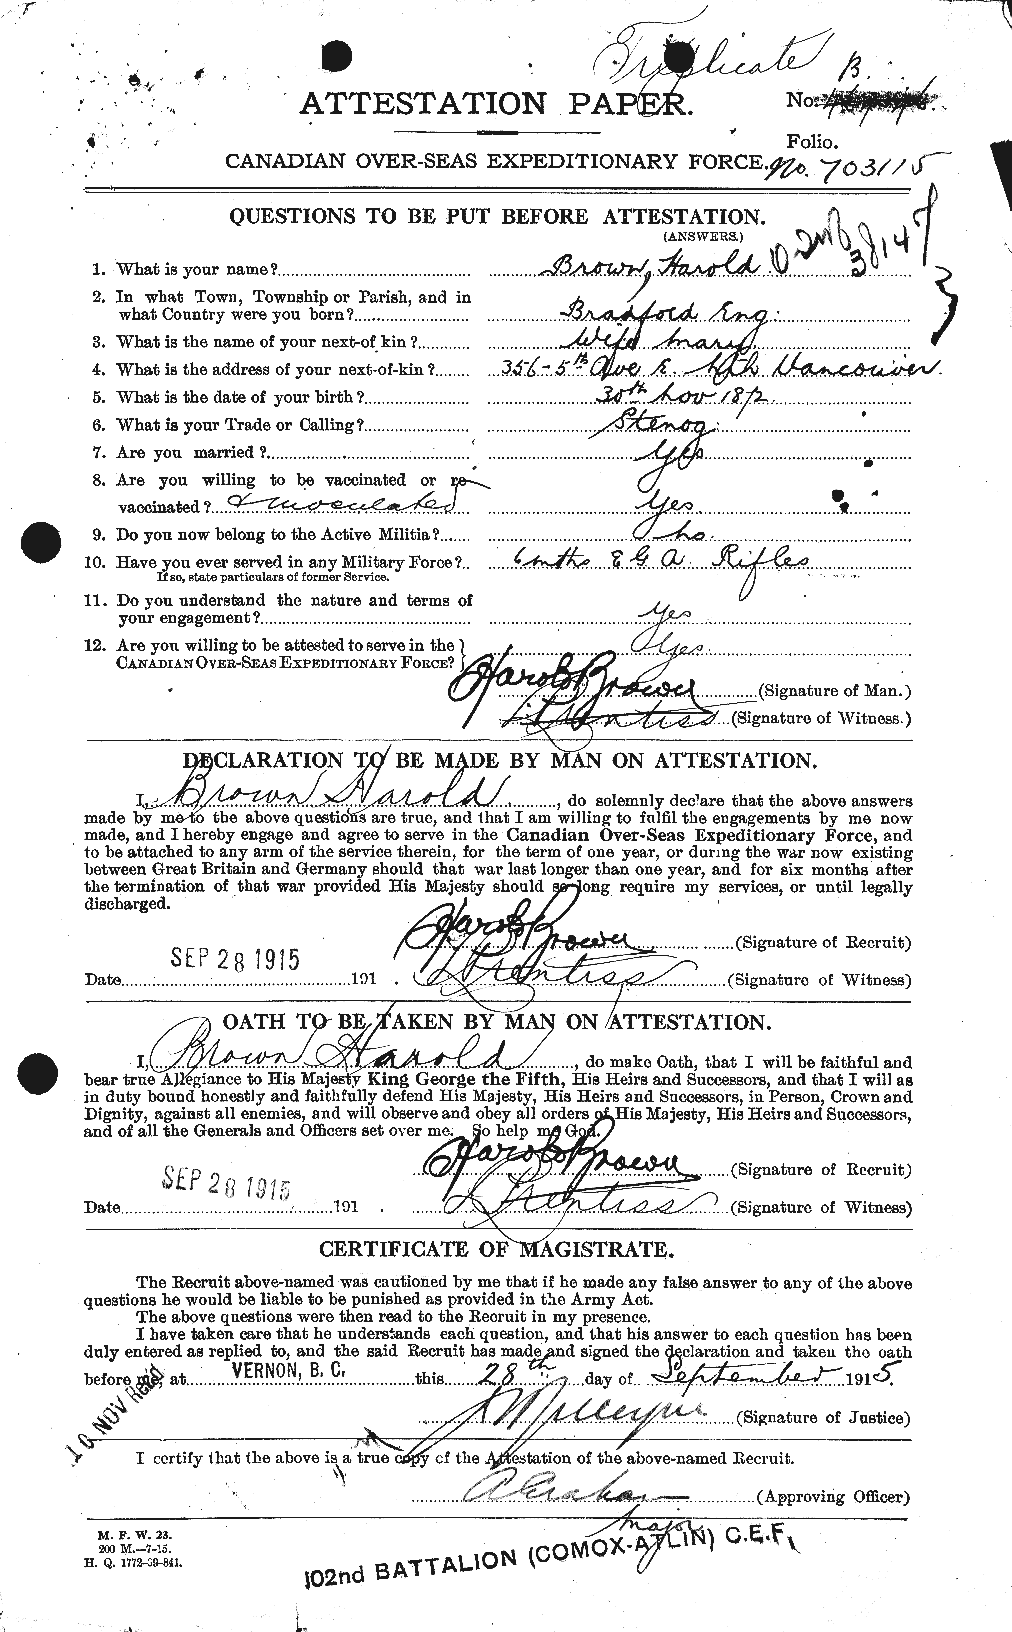 Personnel Records of the First World War - CEF 262669a